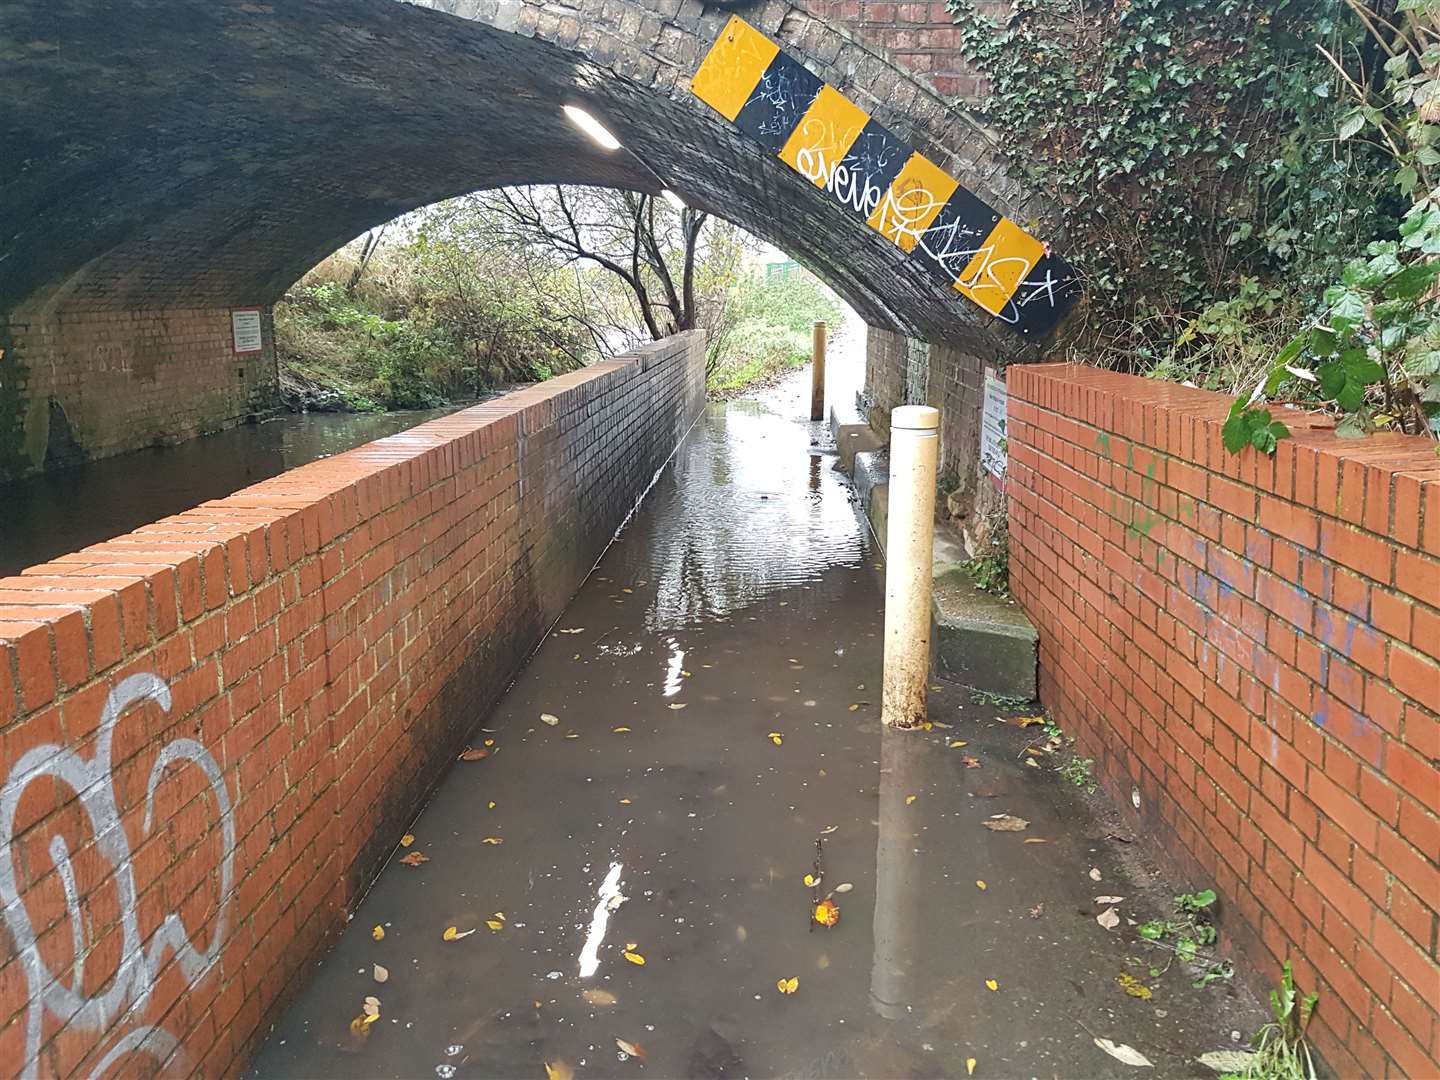 Flooding lasts at the underpass long after the rain stops